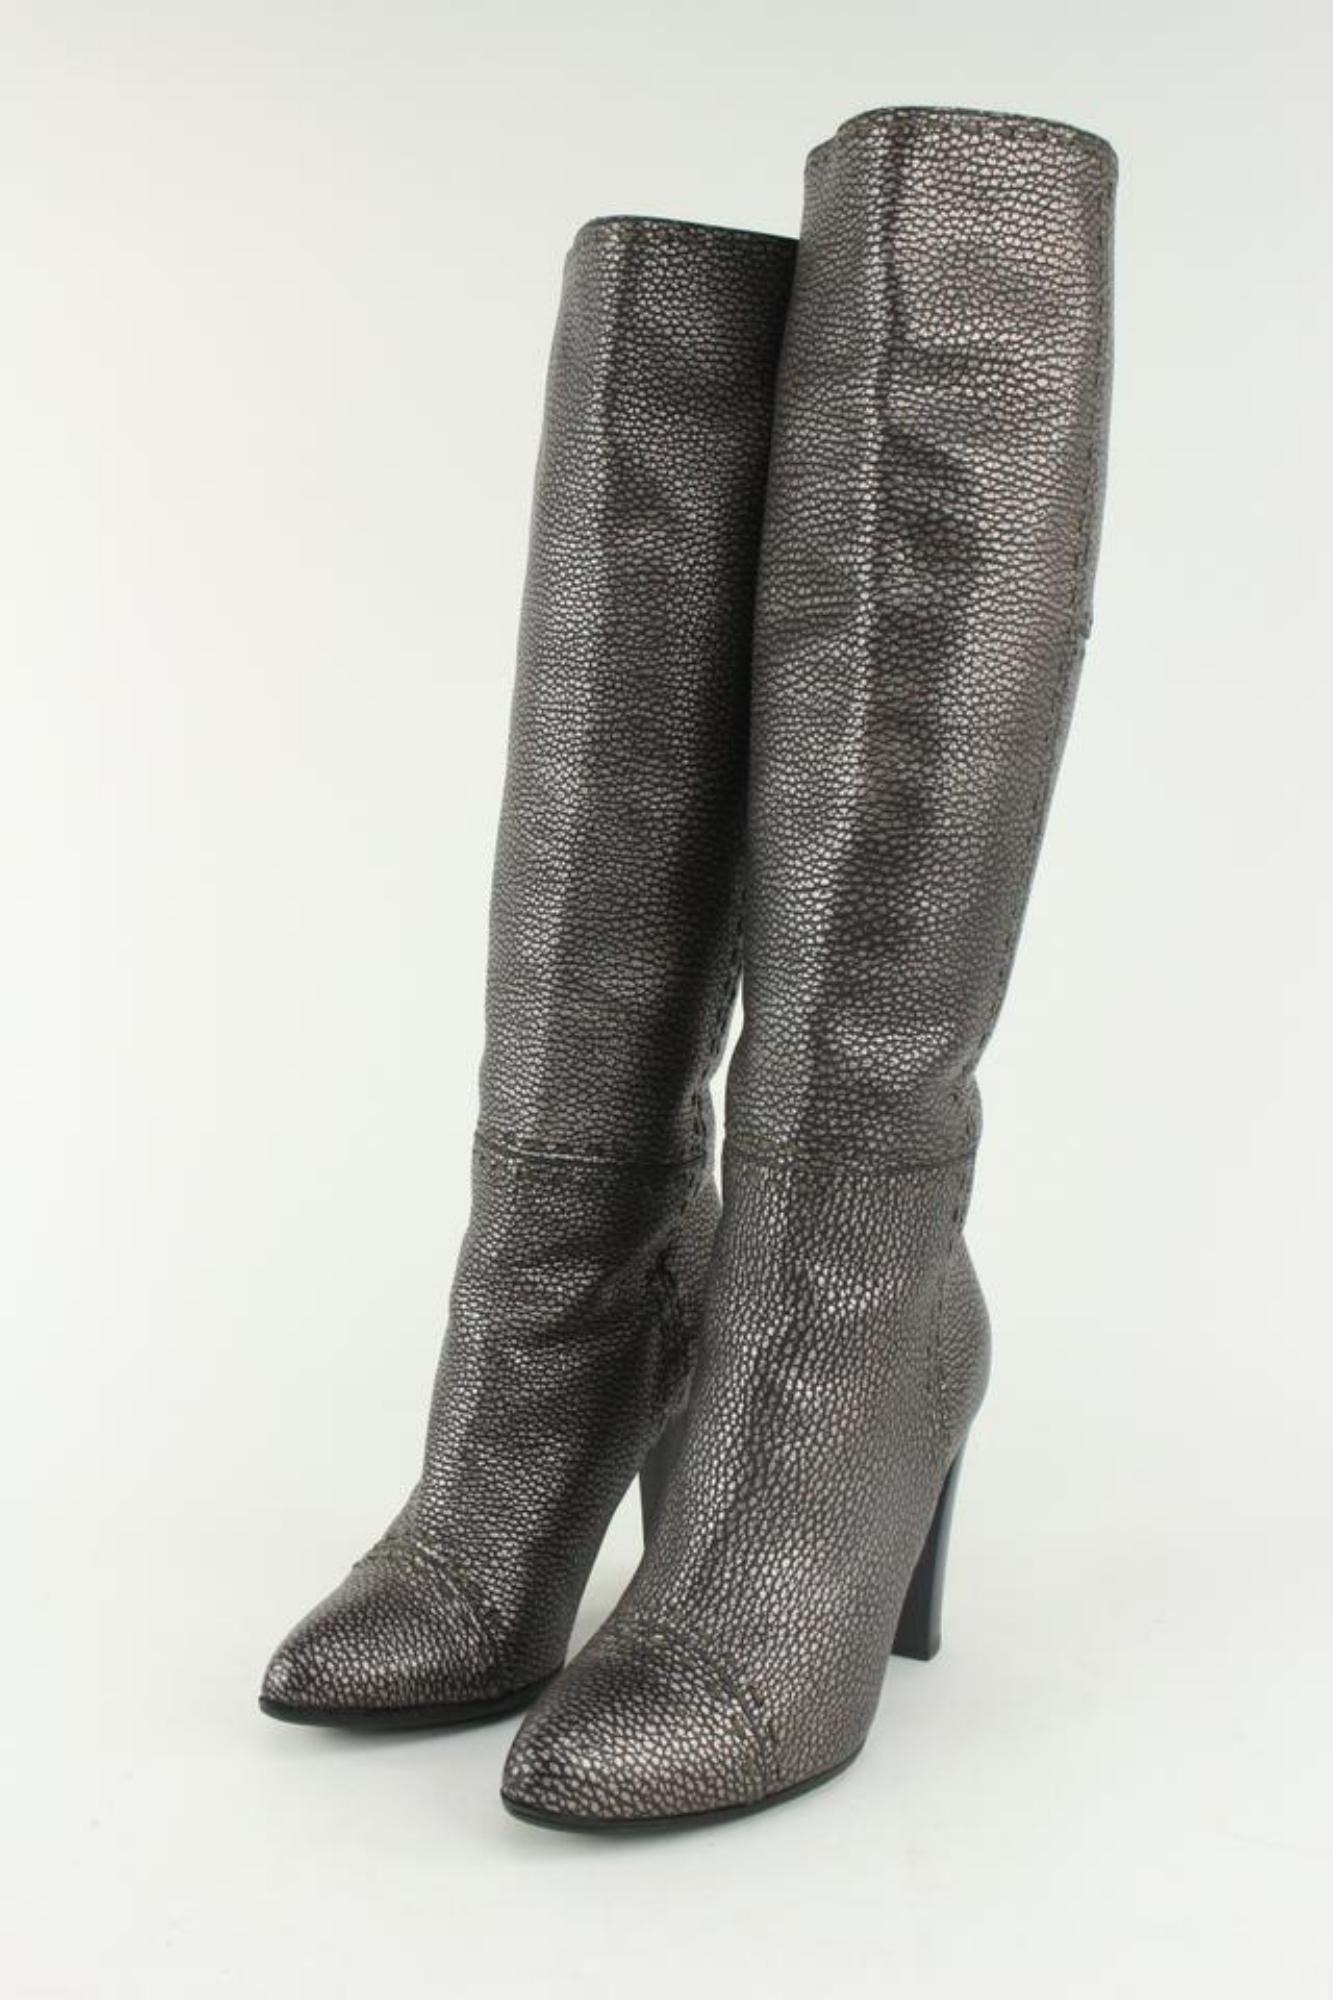 Fendi Women's 36.5 Knee High Grey Leather Selleria Boots 1F1206 For Sale 5